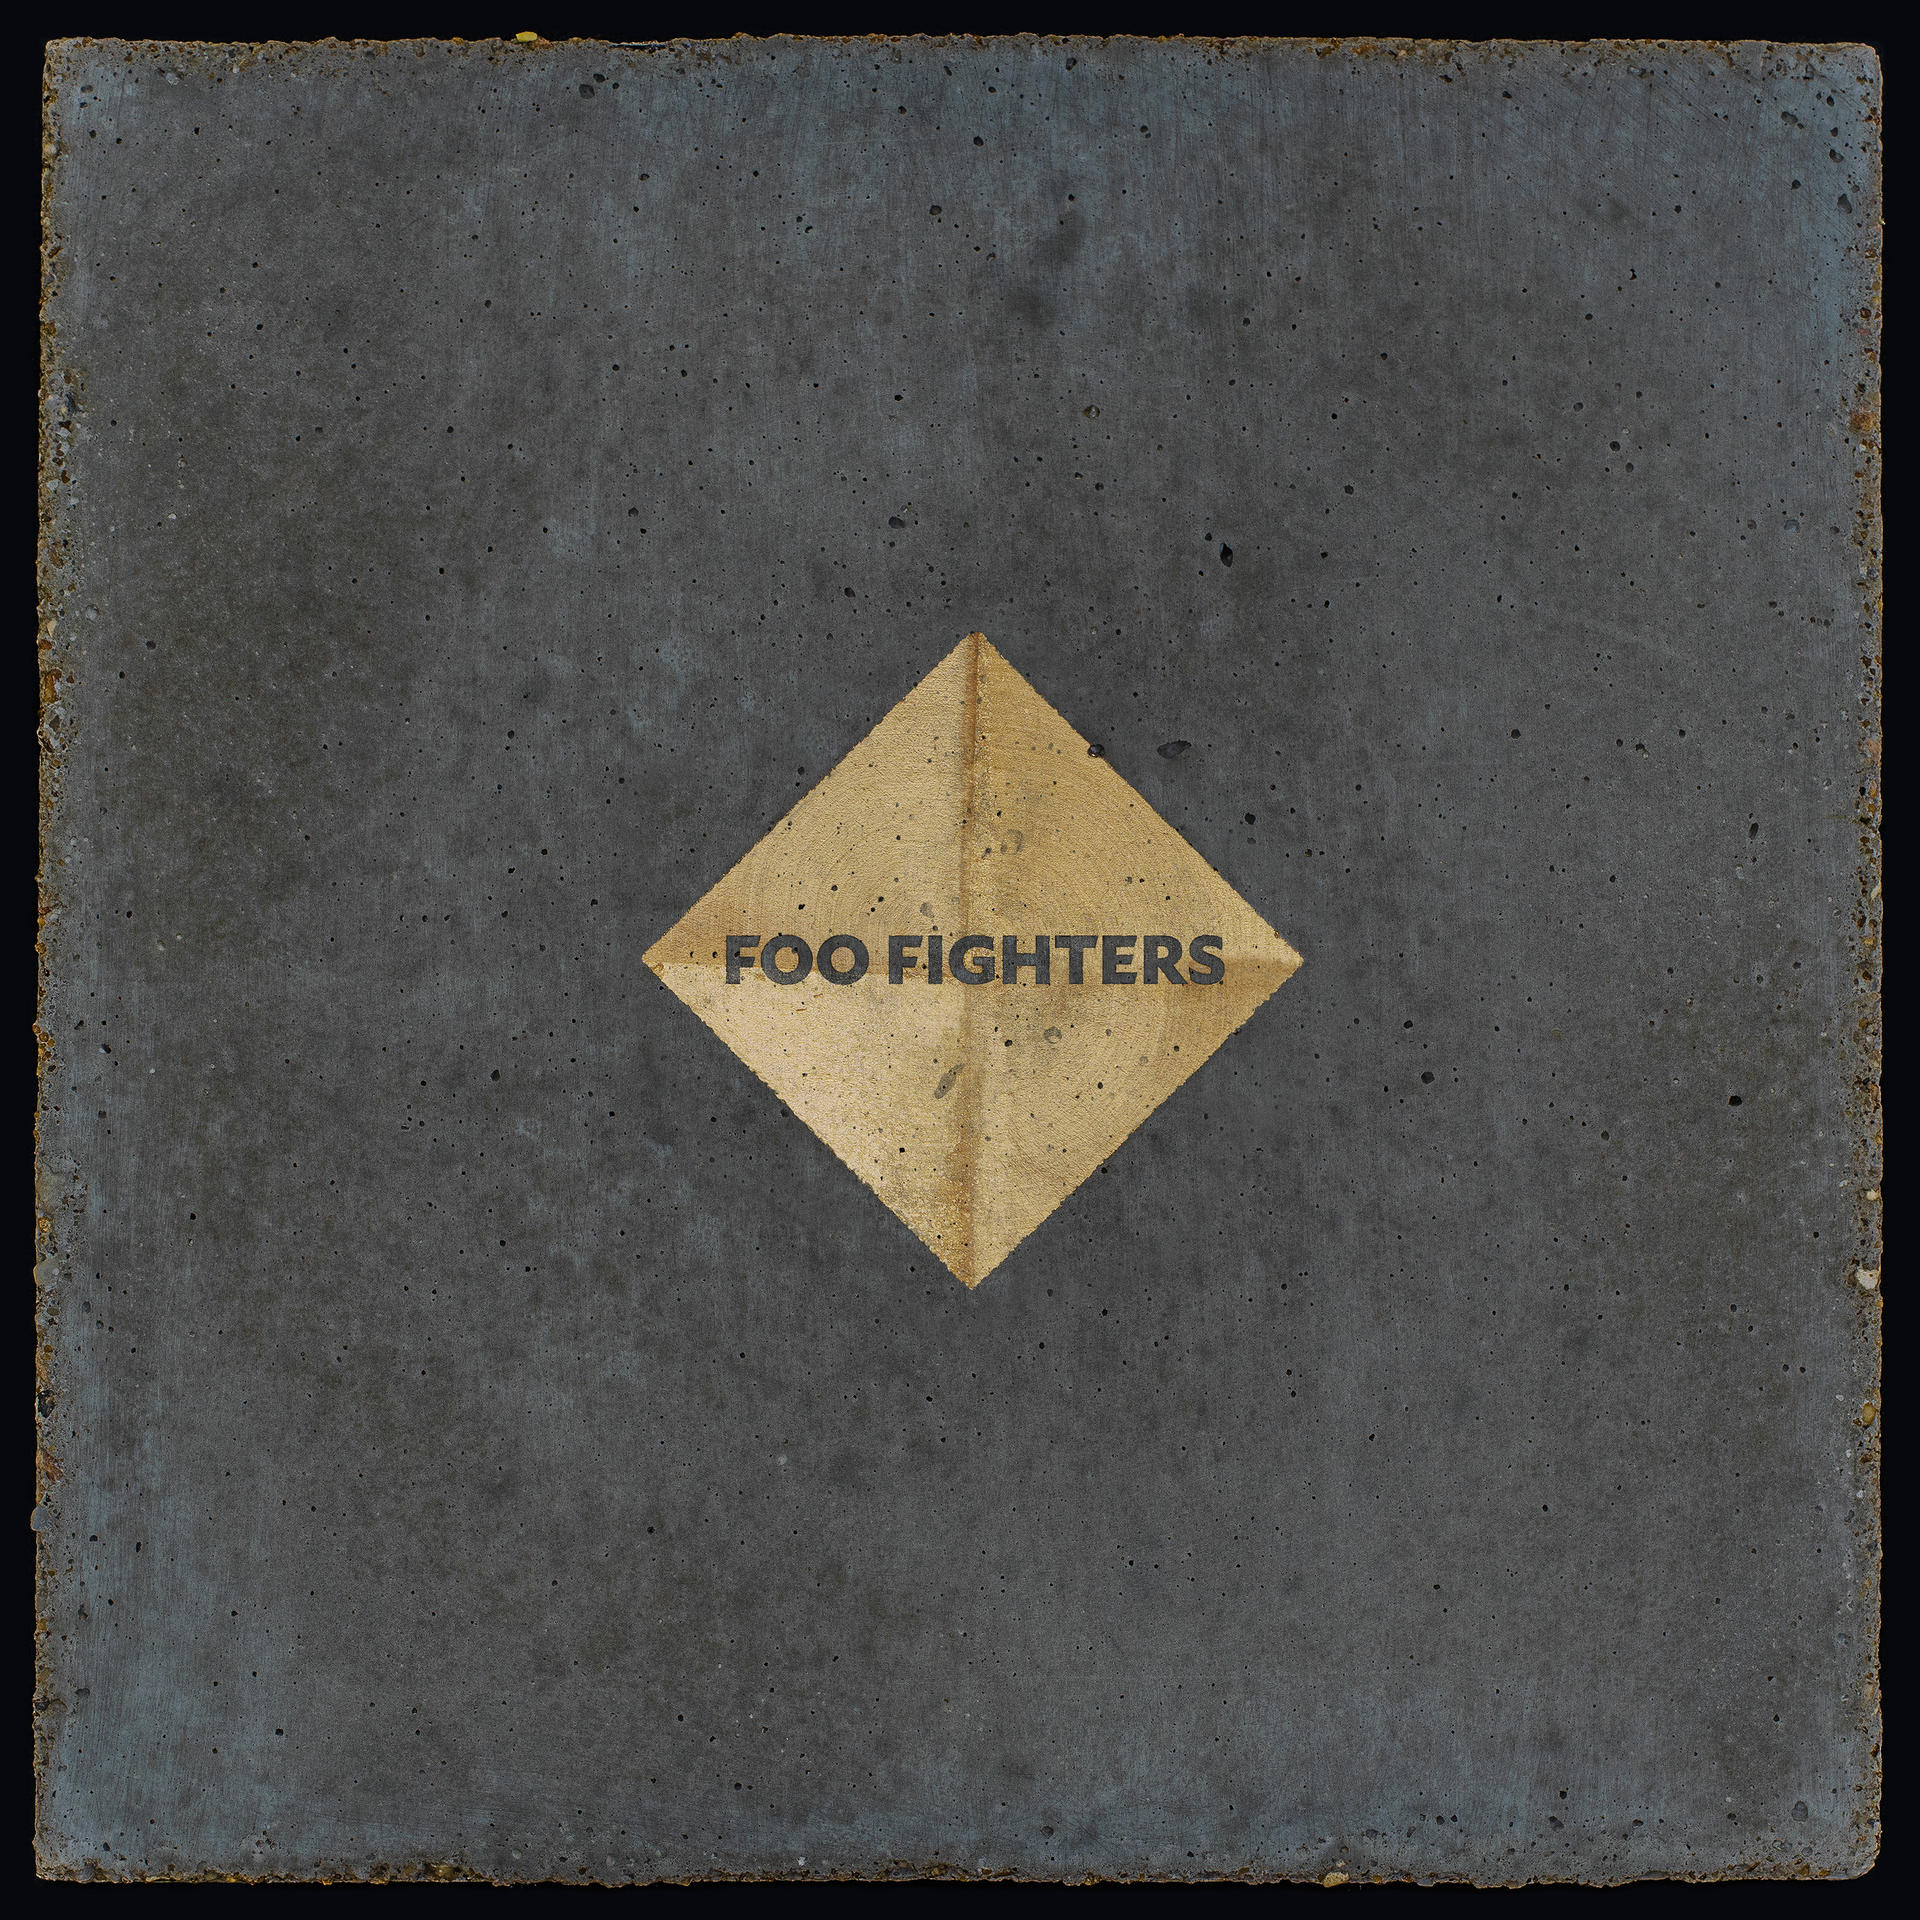 Concrete (Vinyl) Foo Fighters - and - Gold